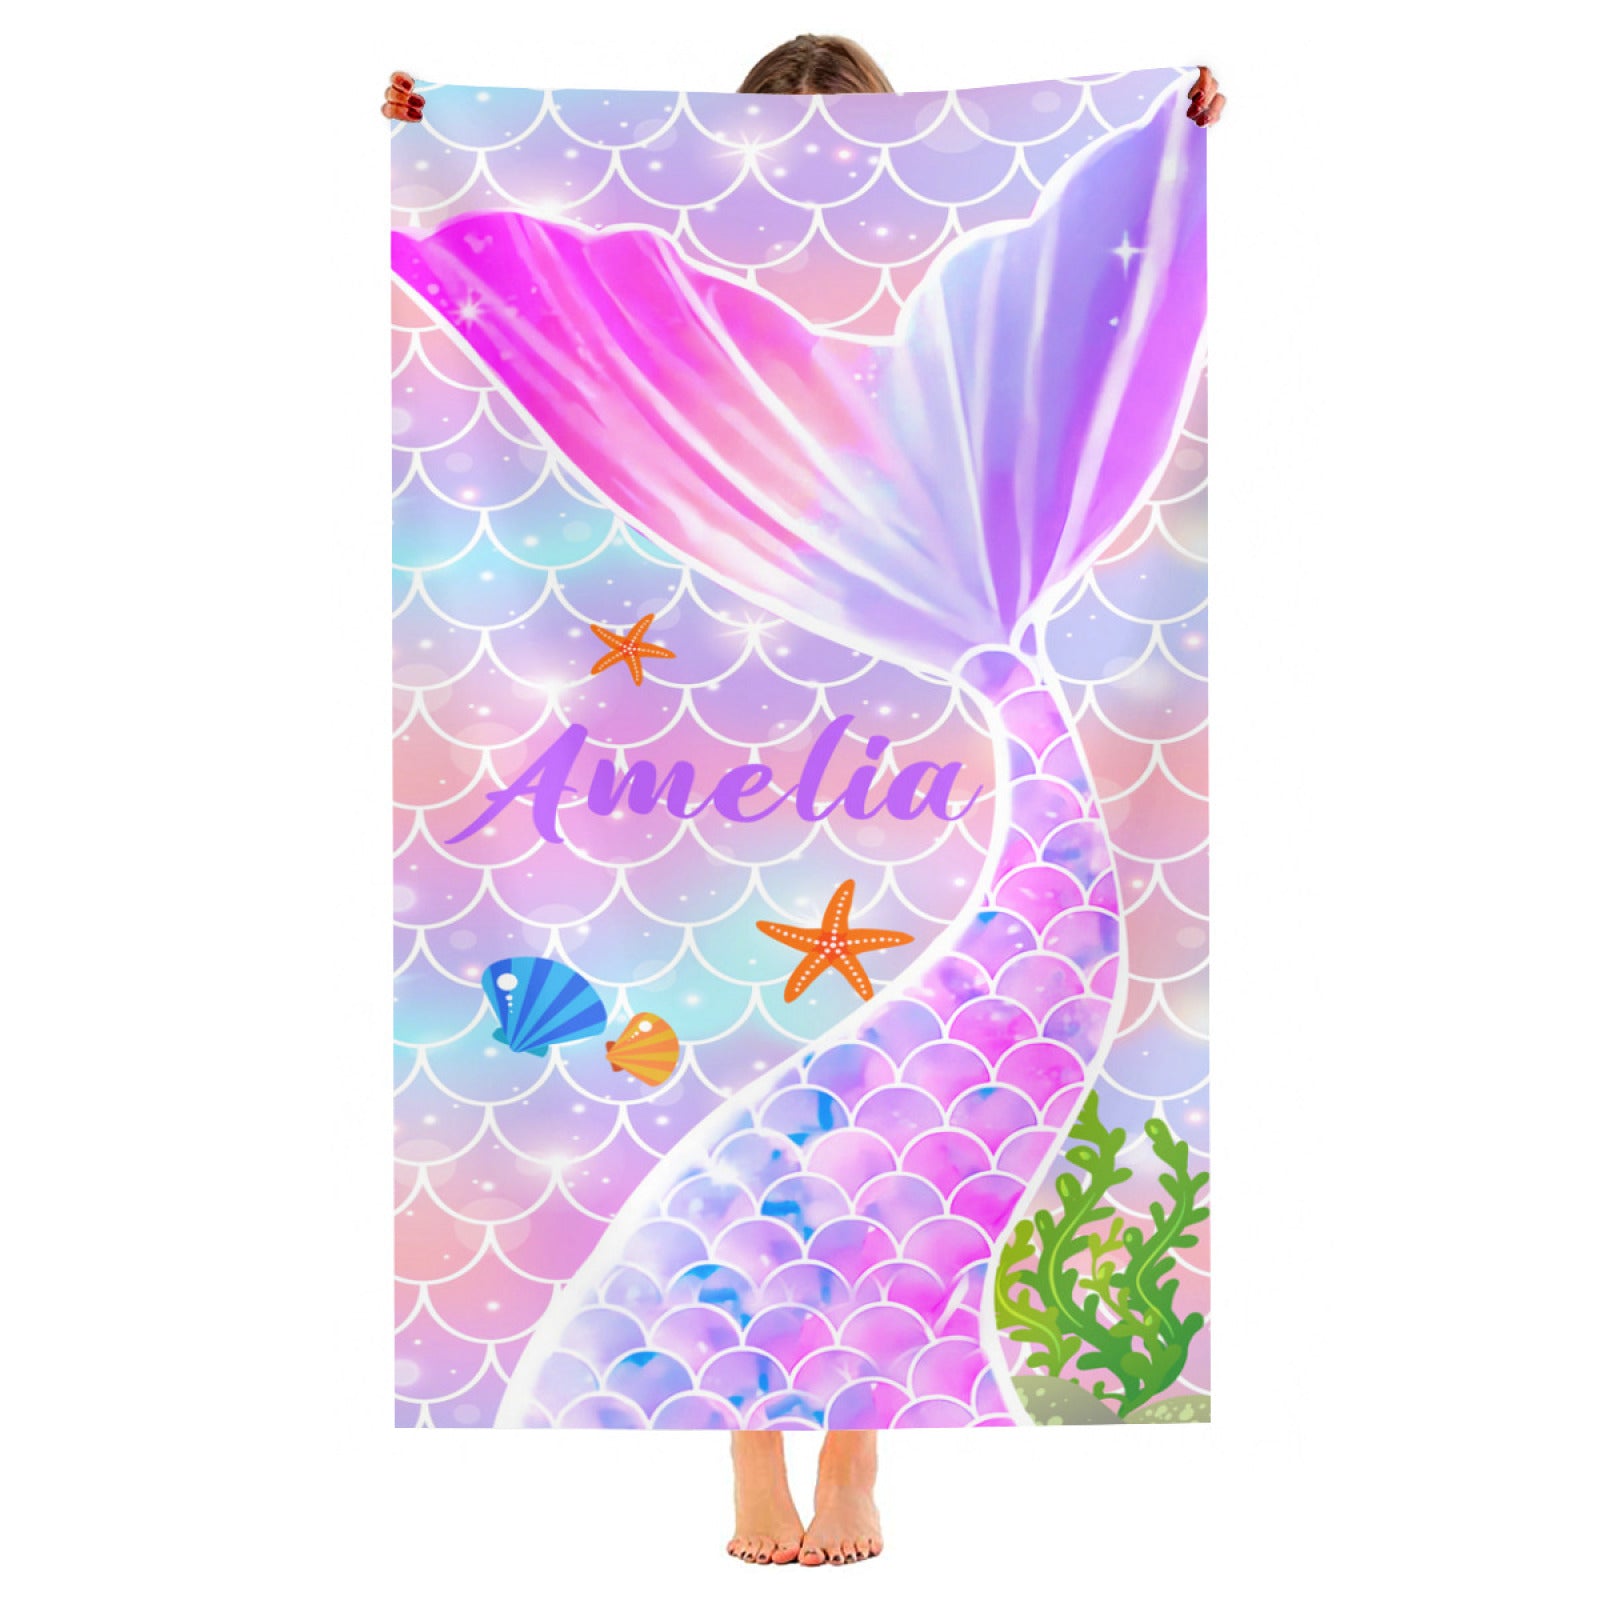 Personalized Mermaid Beach Towels with Name -Scales Beach Towel - Customized Summer Beach Towel - Beach Towel Used as Birthday Gifts - colorfulcustom